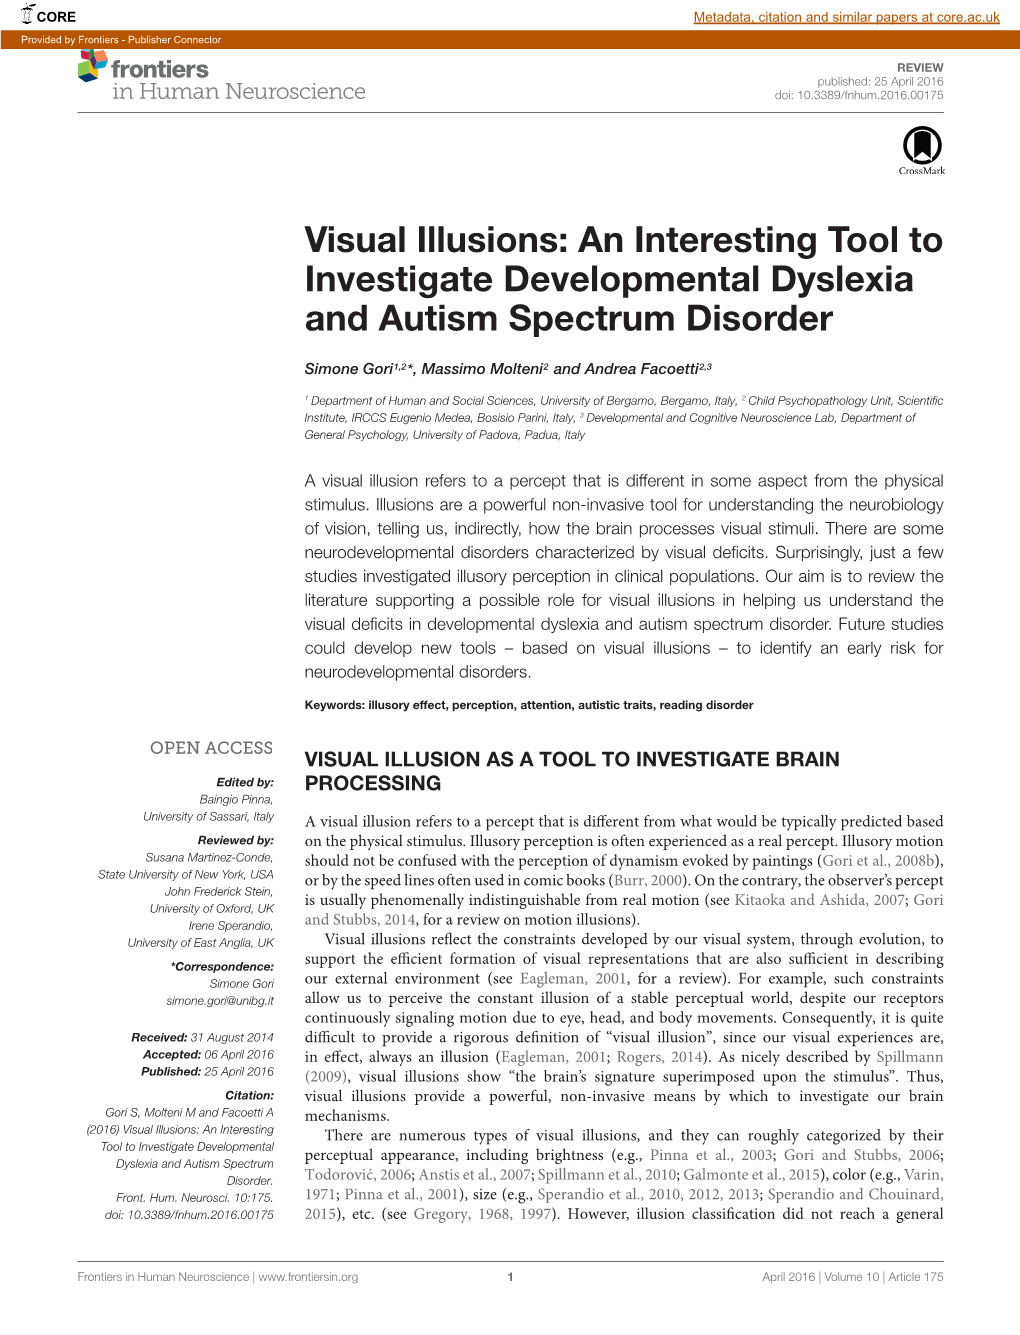 Visual Illusions: an Interesting Tool to Investigate Developmental Dyslexia and Autism Spectrum Disorder